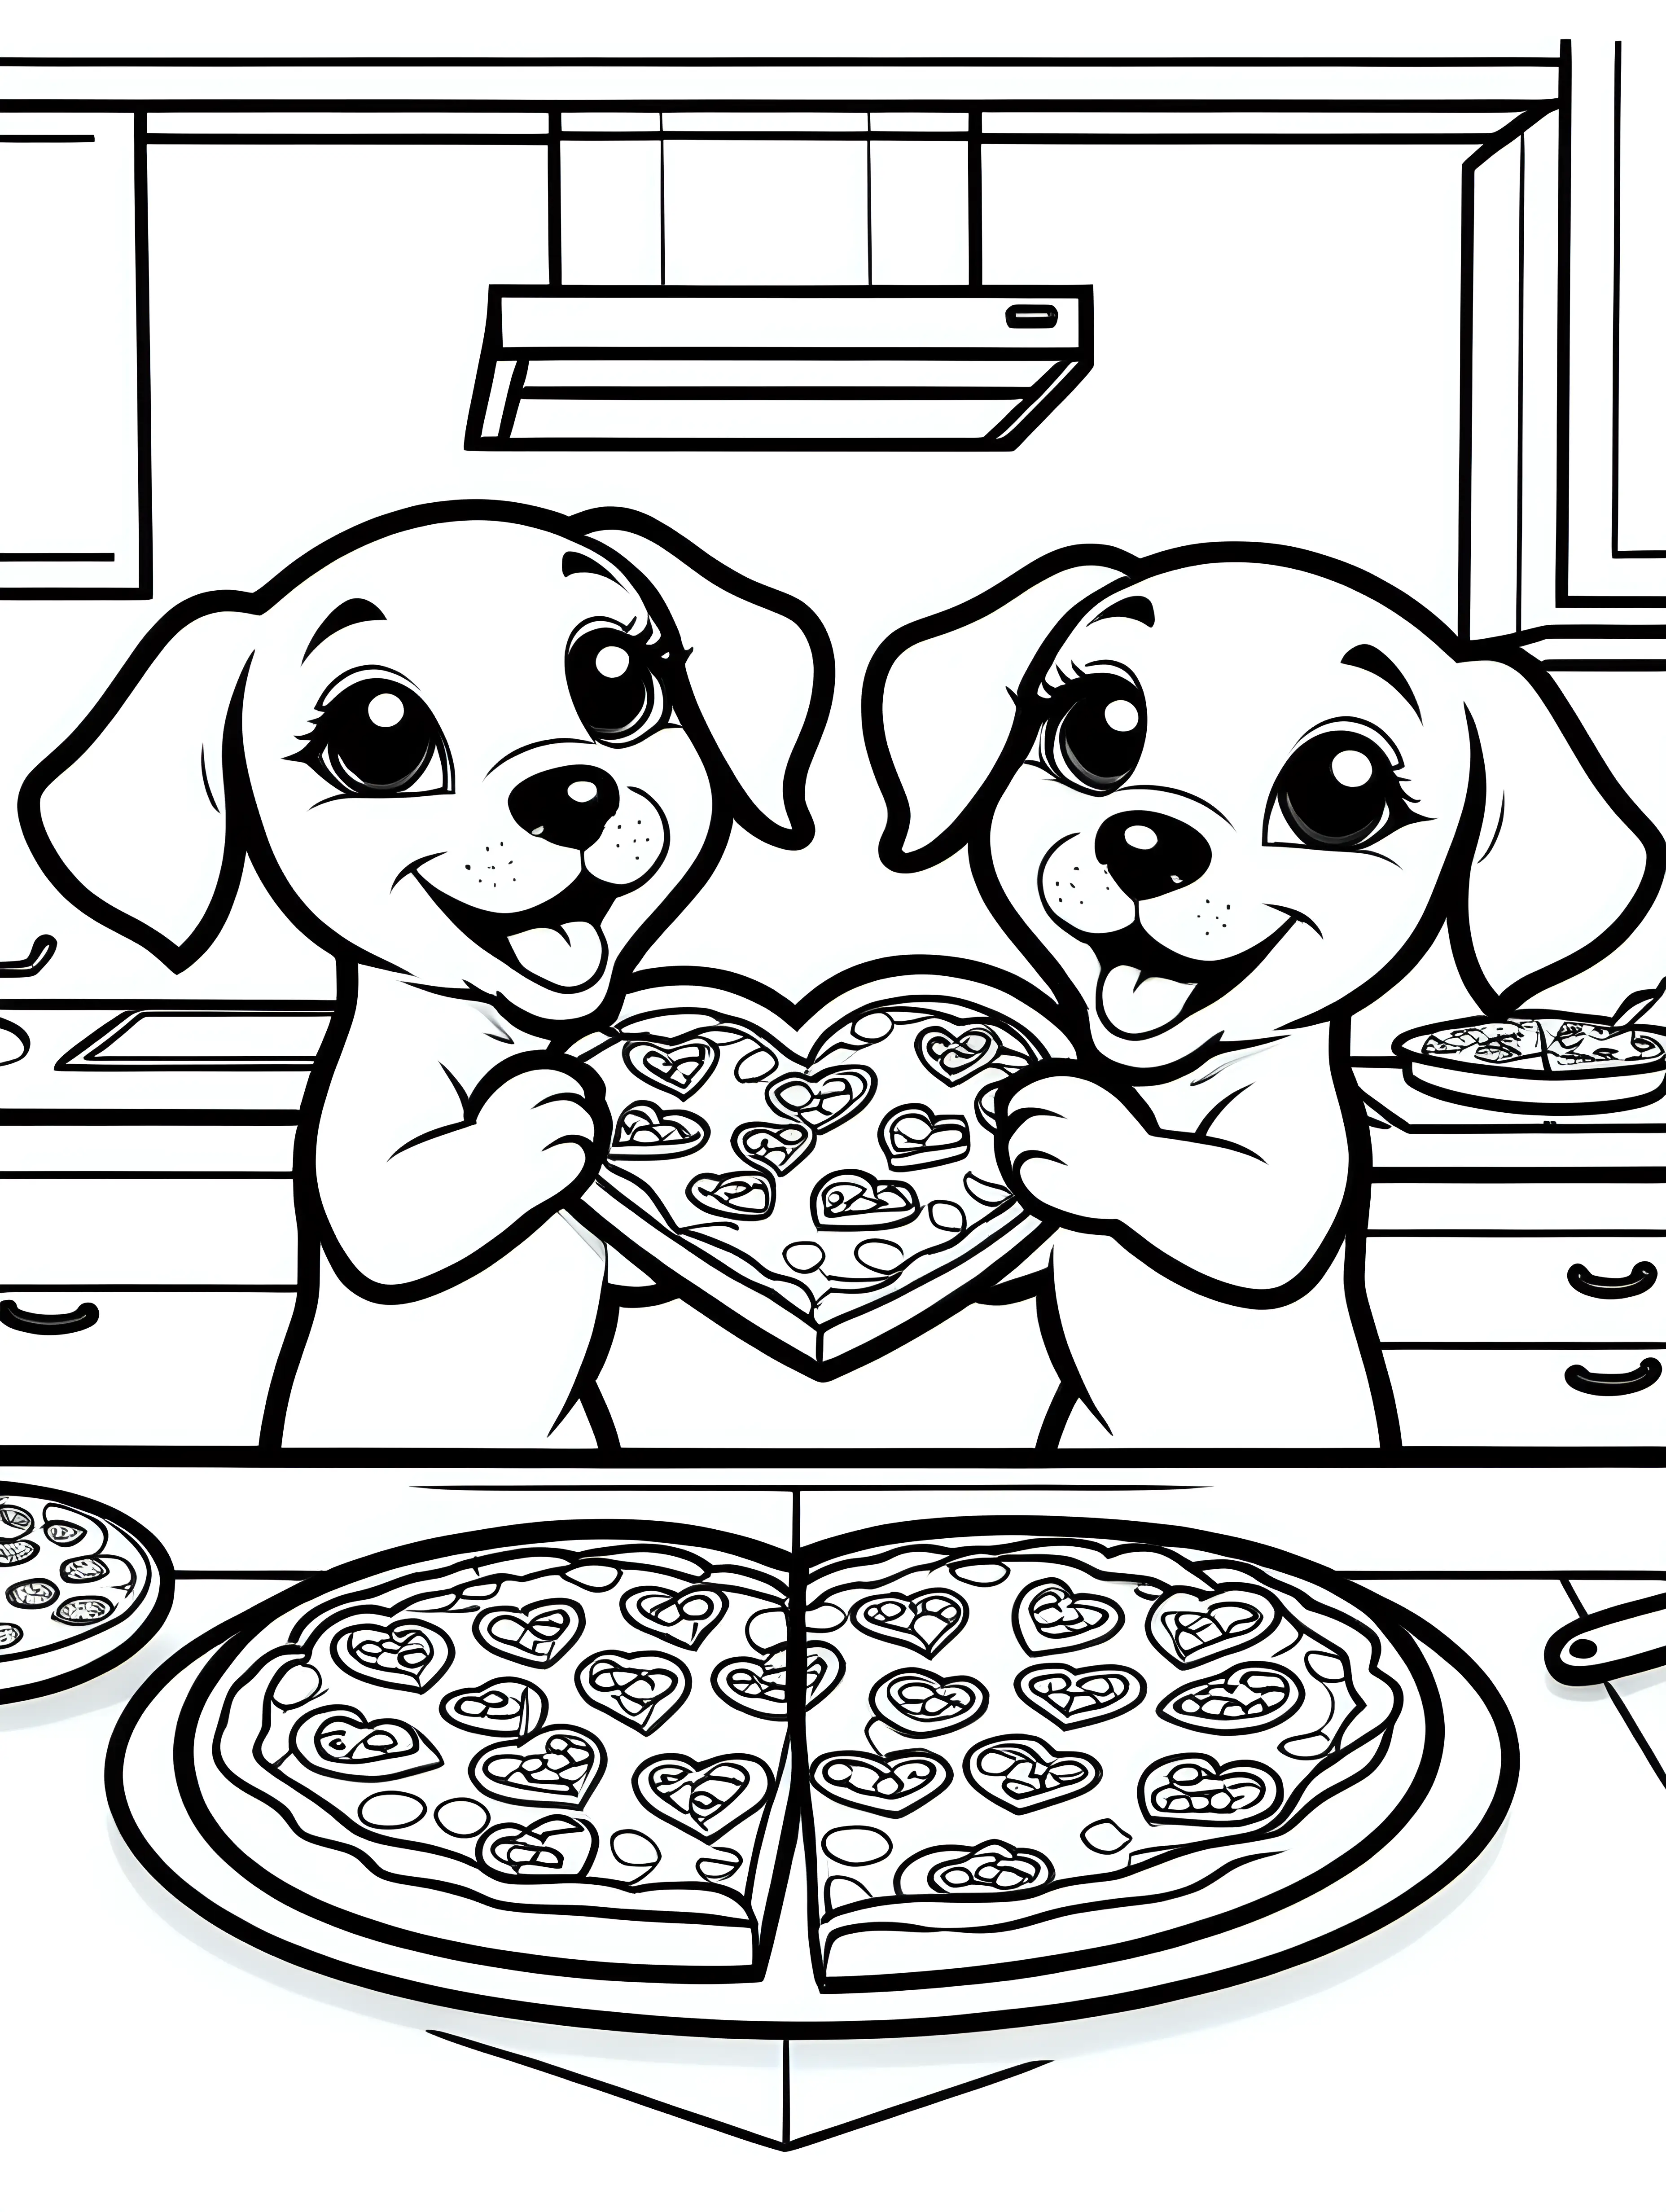 create a coloring page of two cute puppies eating heart shaped pizza in kitchen, black outlines, no shading
